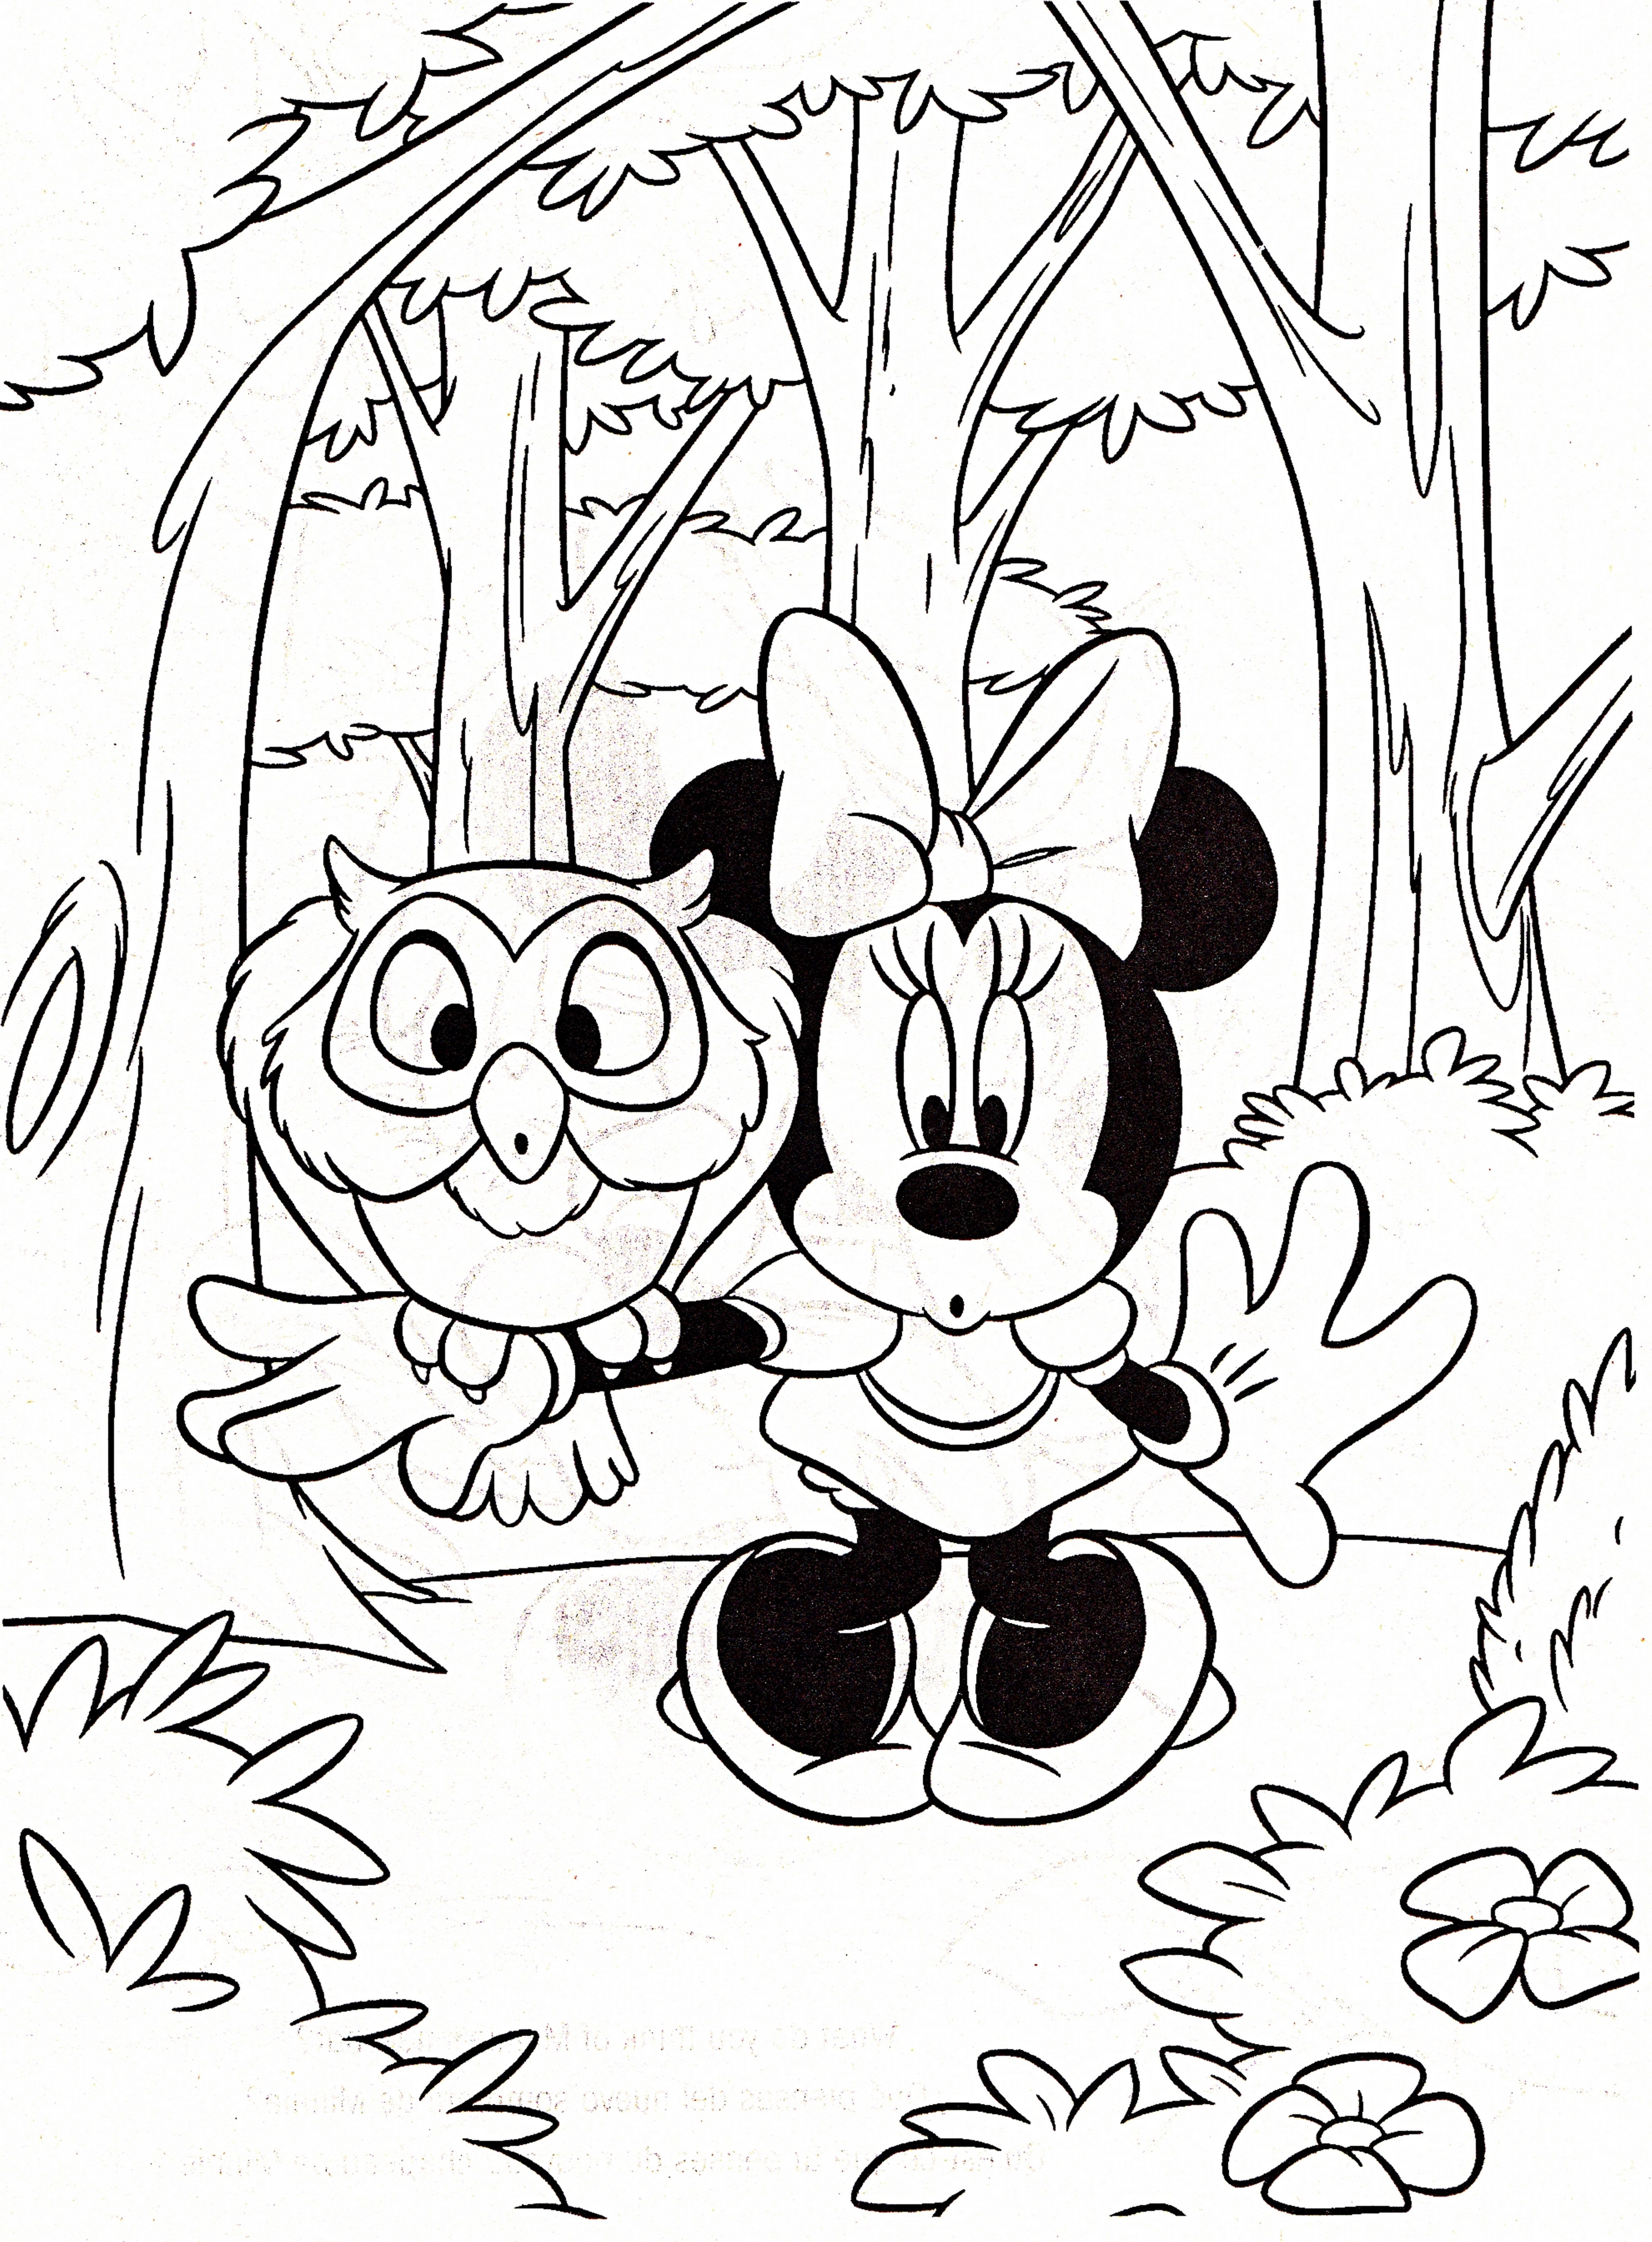 Coloring Pages Disney Printable - Printable World Holiday